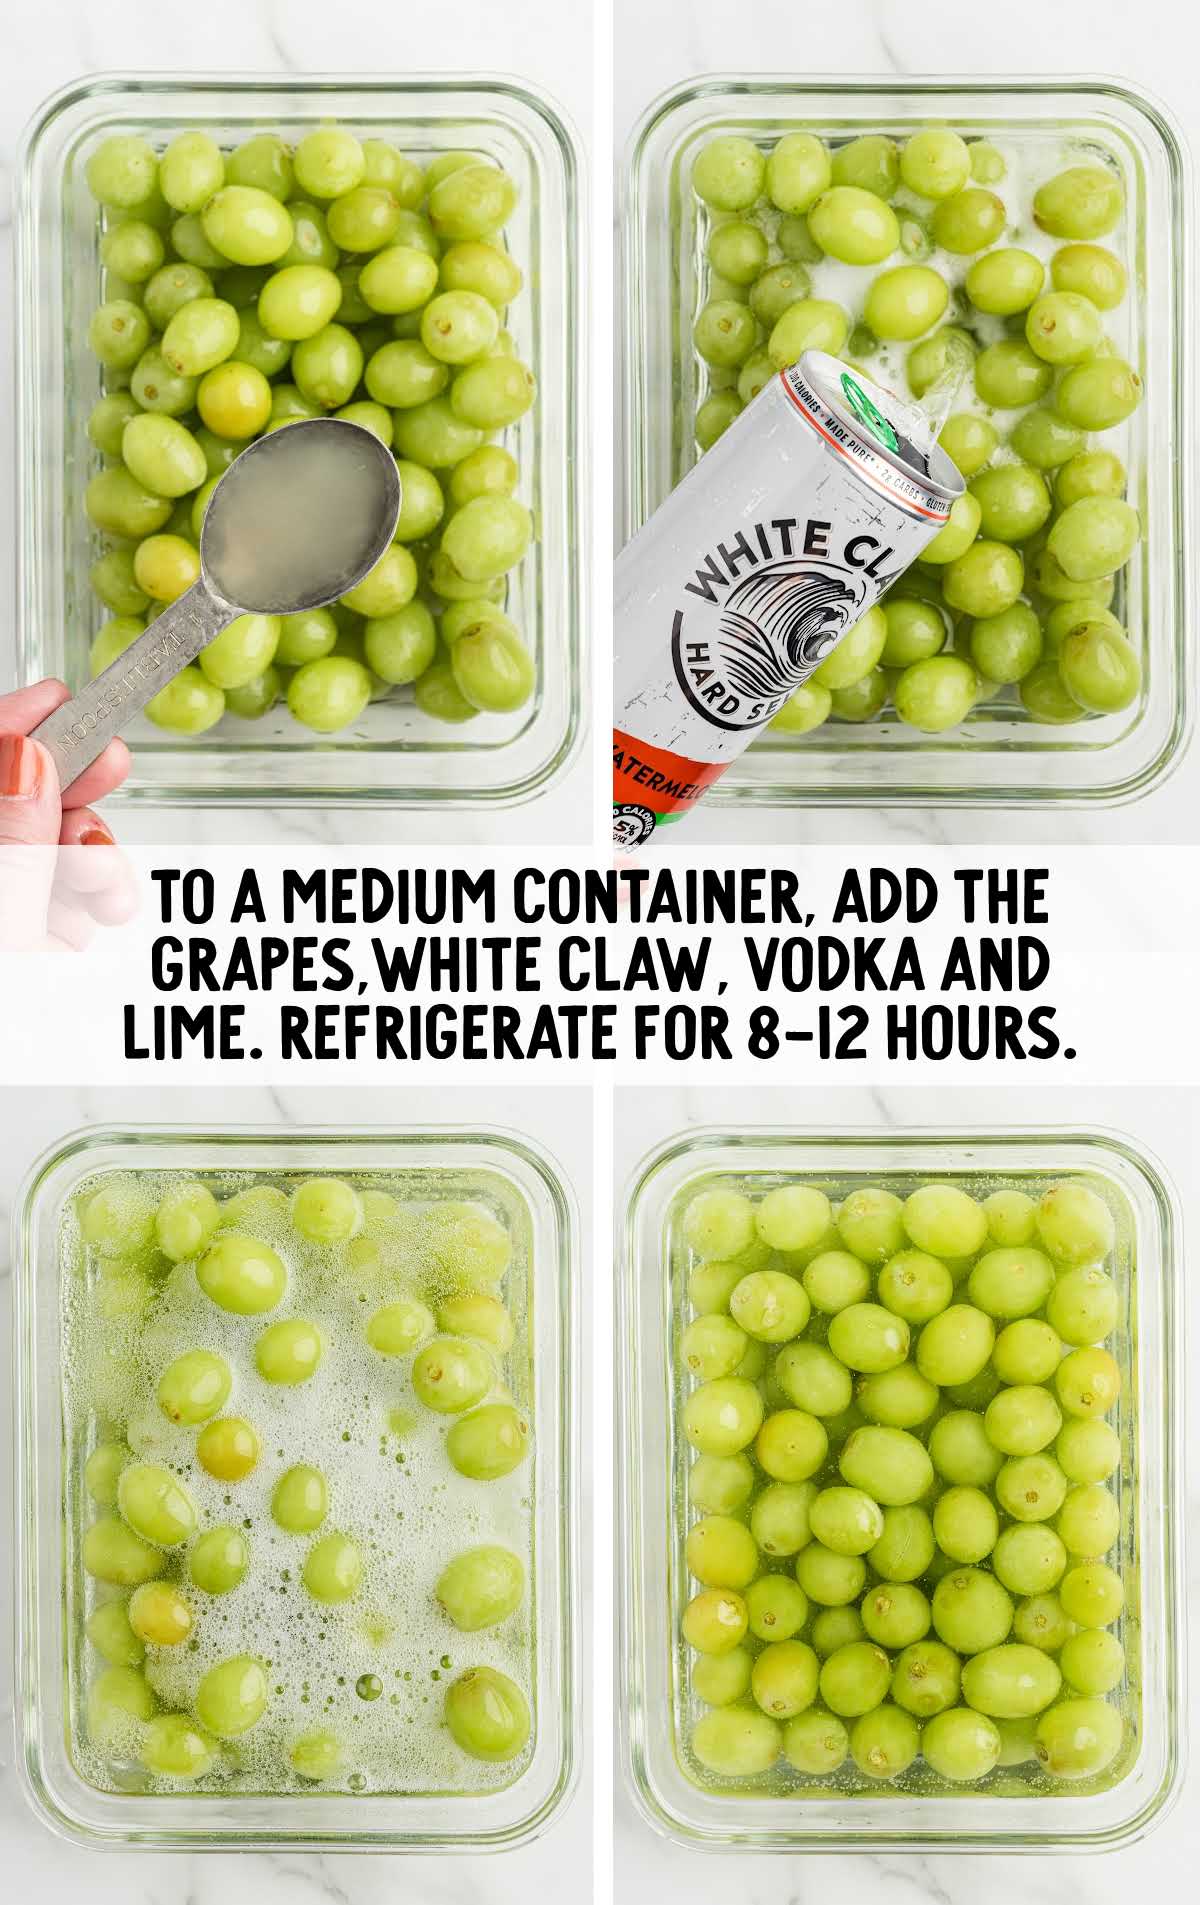 seedless green grapes, Watermelon White Claw, vodka, and fresh squeezed lime juice combined in a container